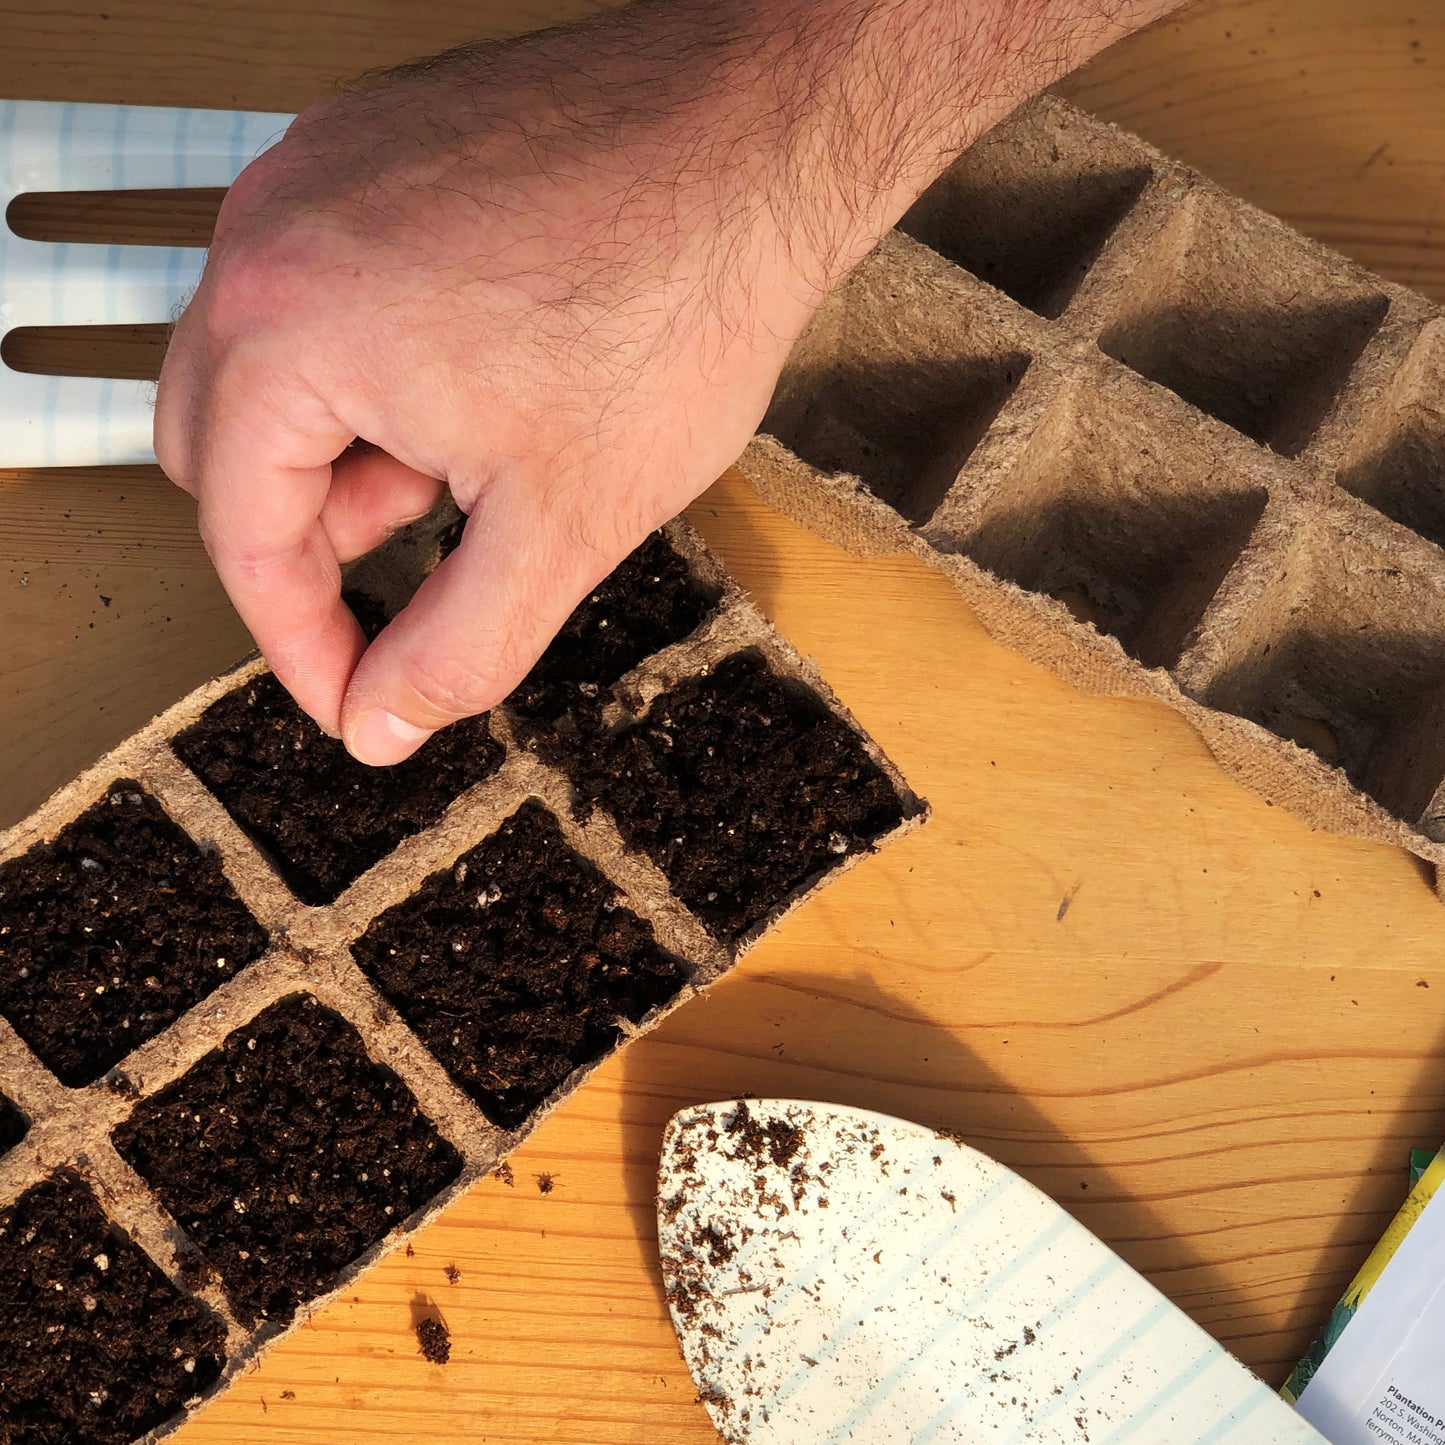 Planting Early Golden Acre Cabbage Seeds into Jiffy seed starting peat strip trays filled with sowing medium.